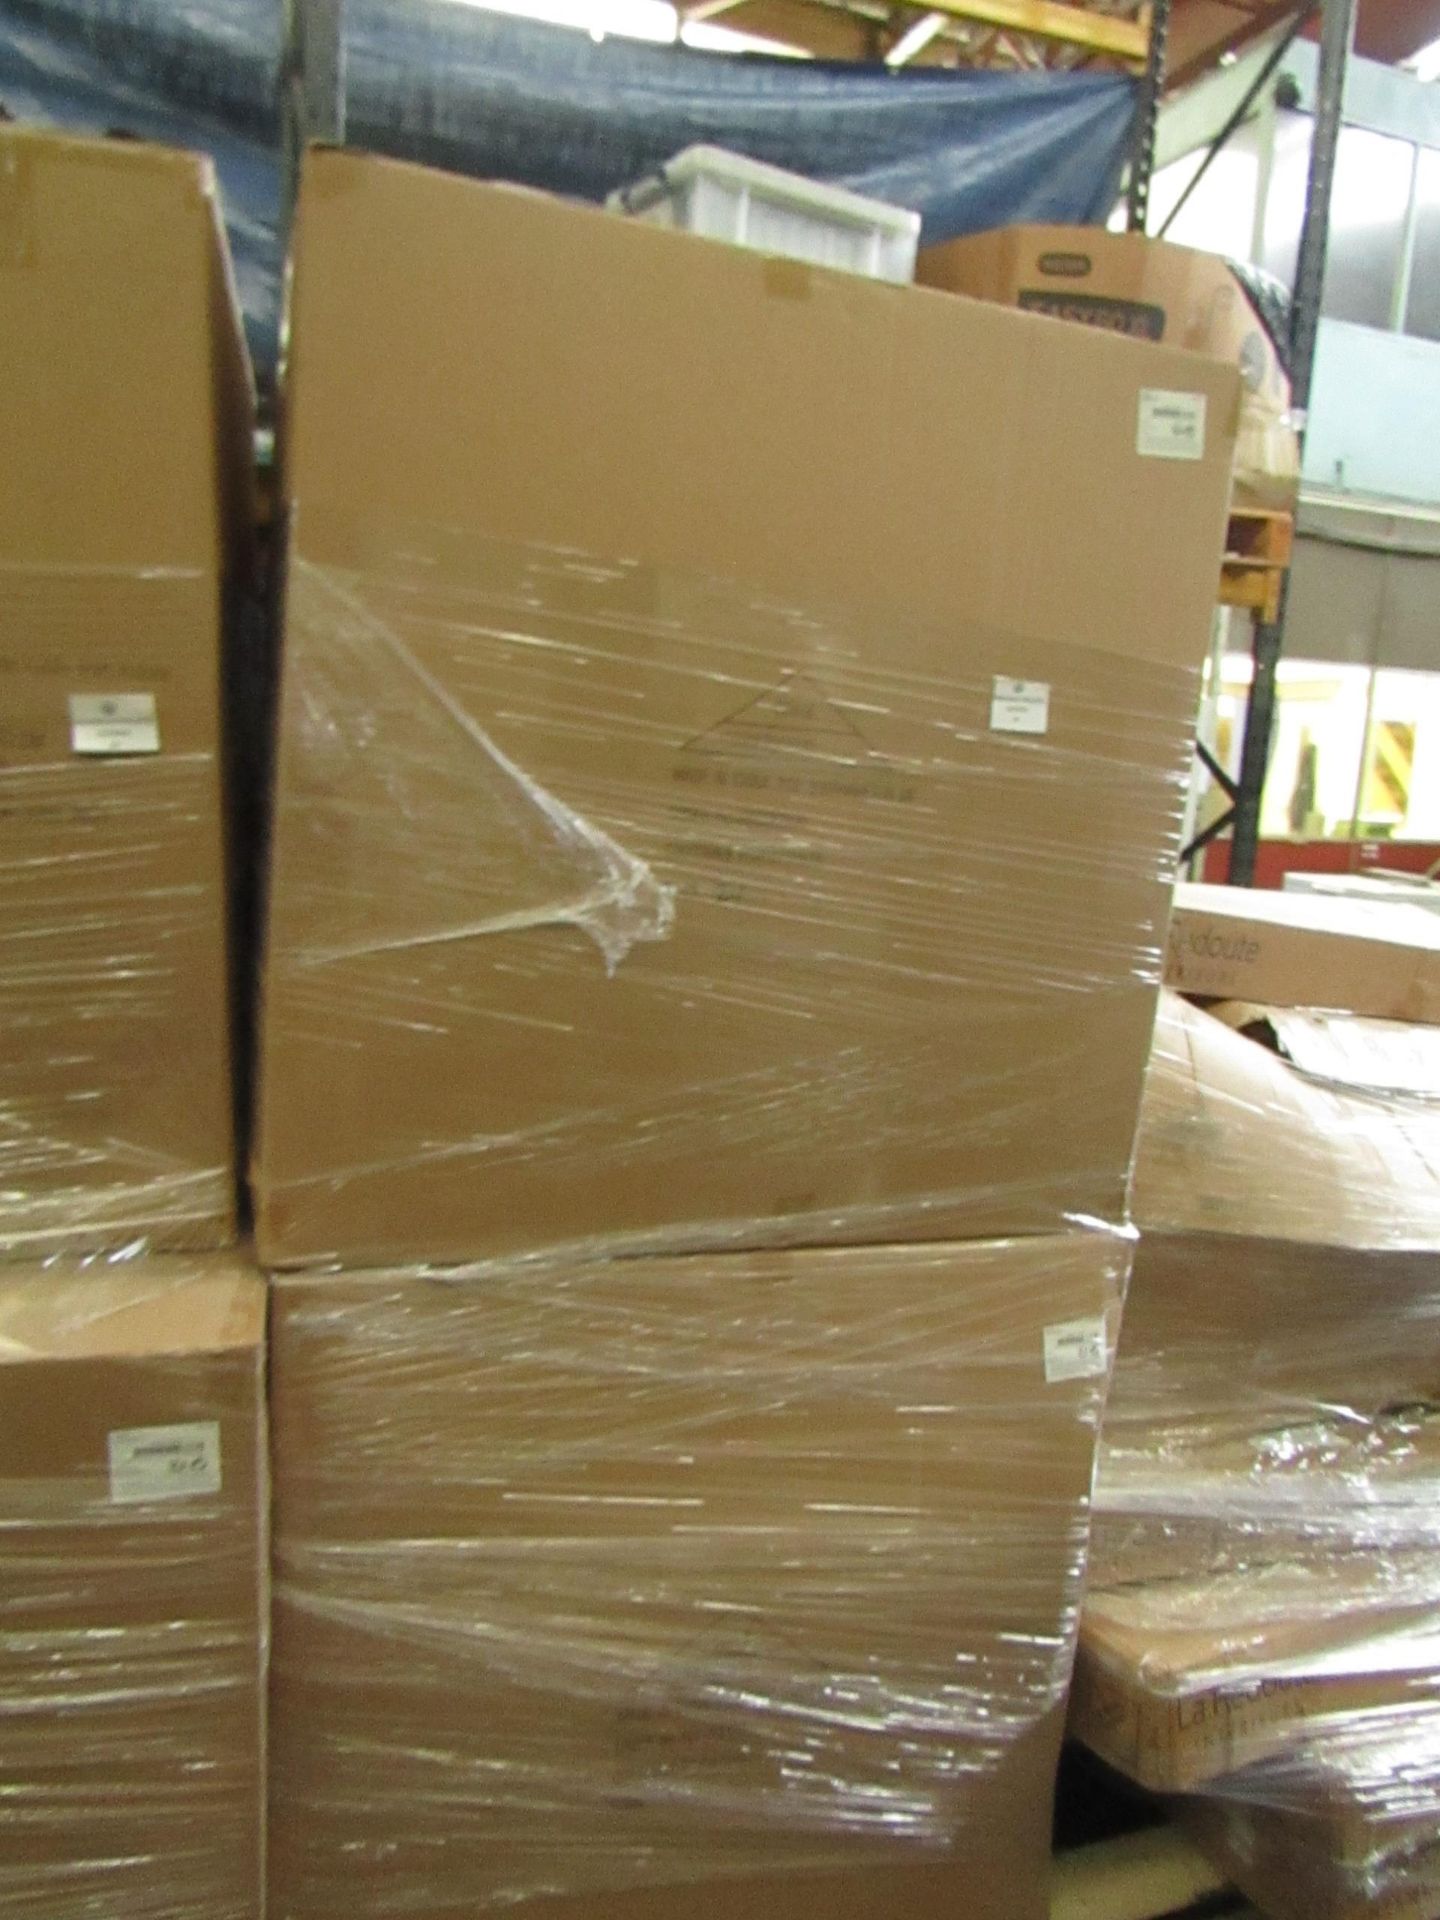 A Pallet of 8 Black Iron Side tables, raw returns which are unchecked